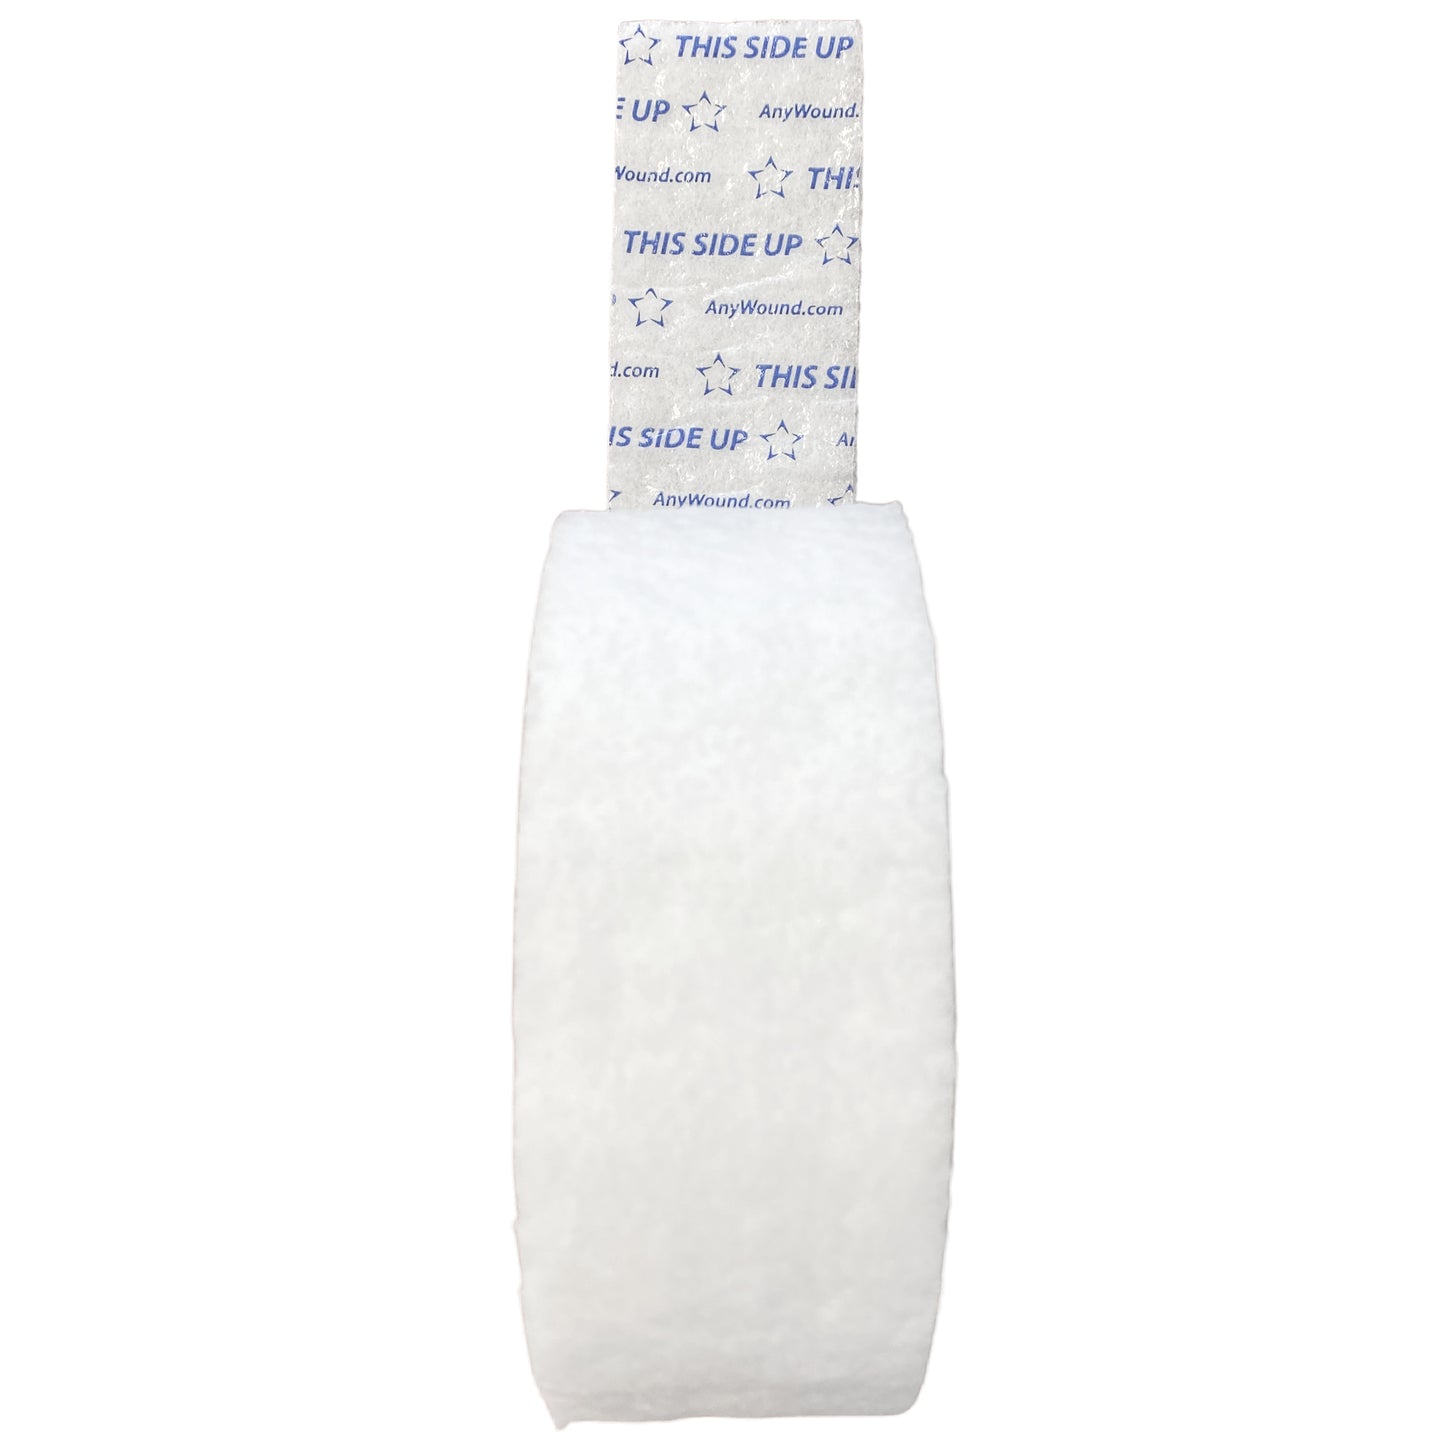 ENLUXTRA-R Wound Dressing Roll for Legs, Arms, Torso and Head 1.5" x 80"